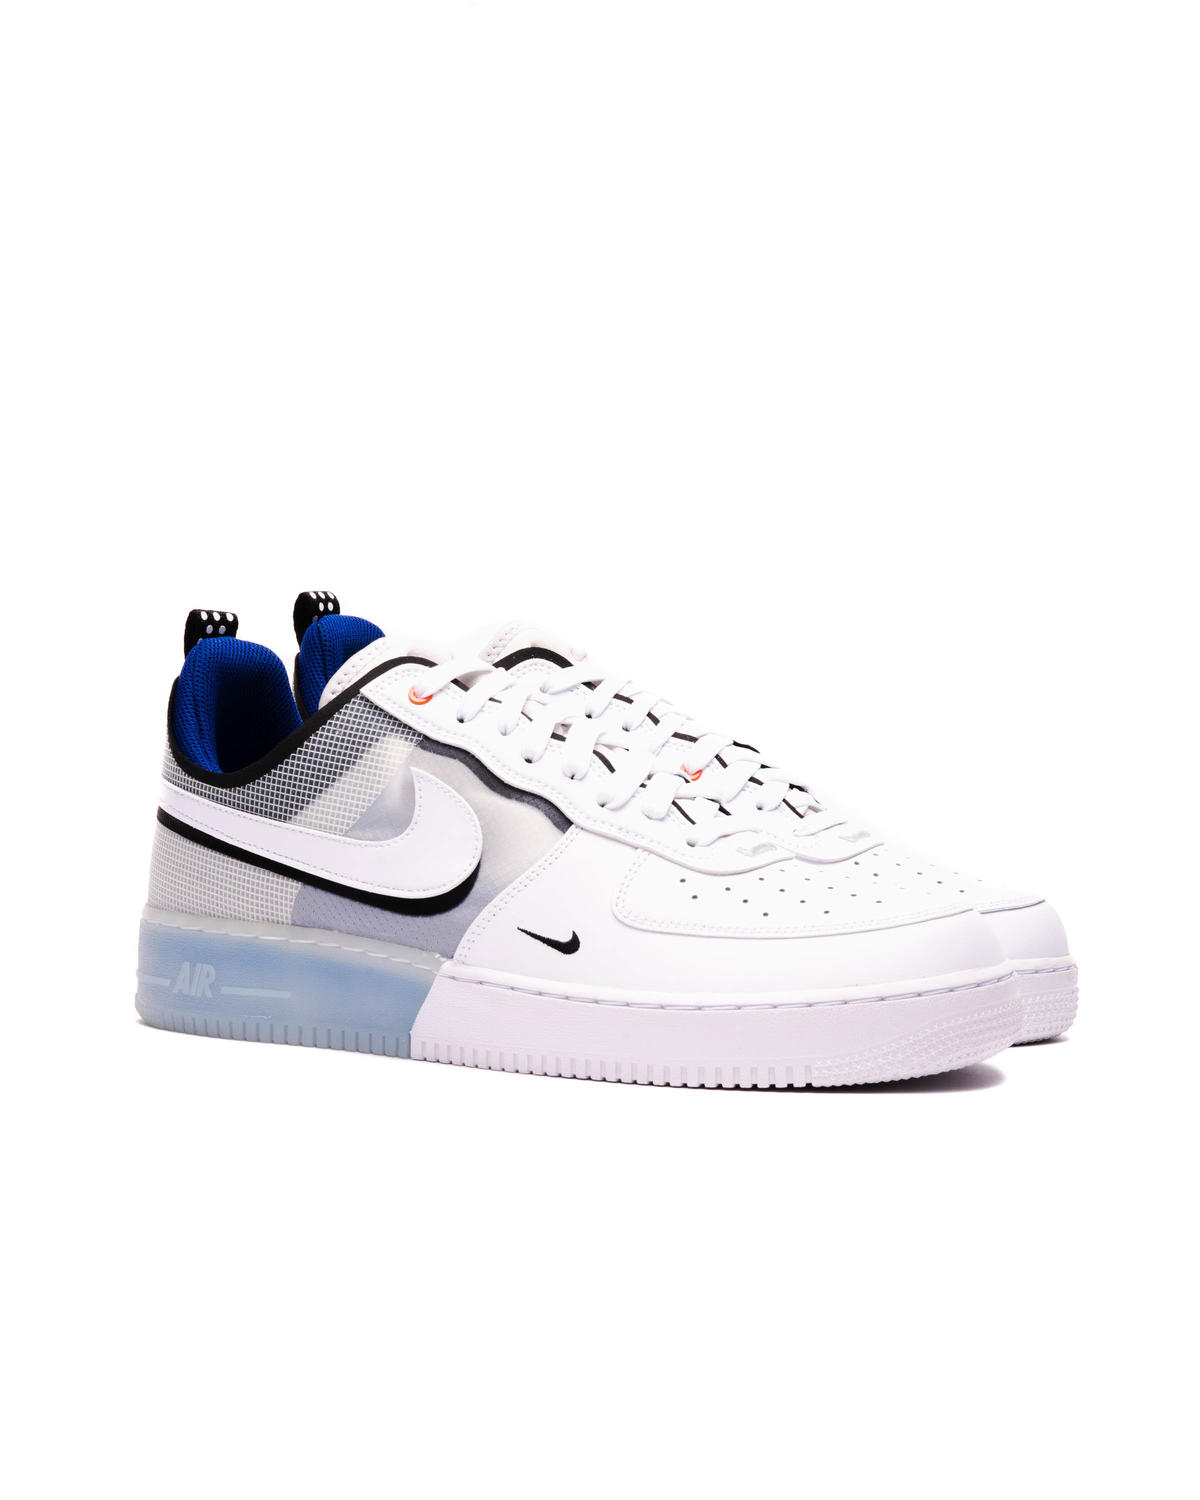 Nike Air Force One White Leather Utility Low Top Sneakers Size 42.5